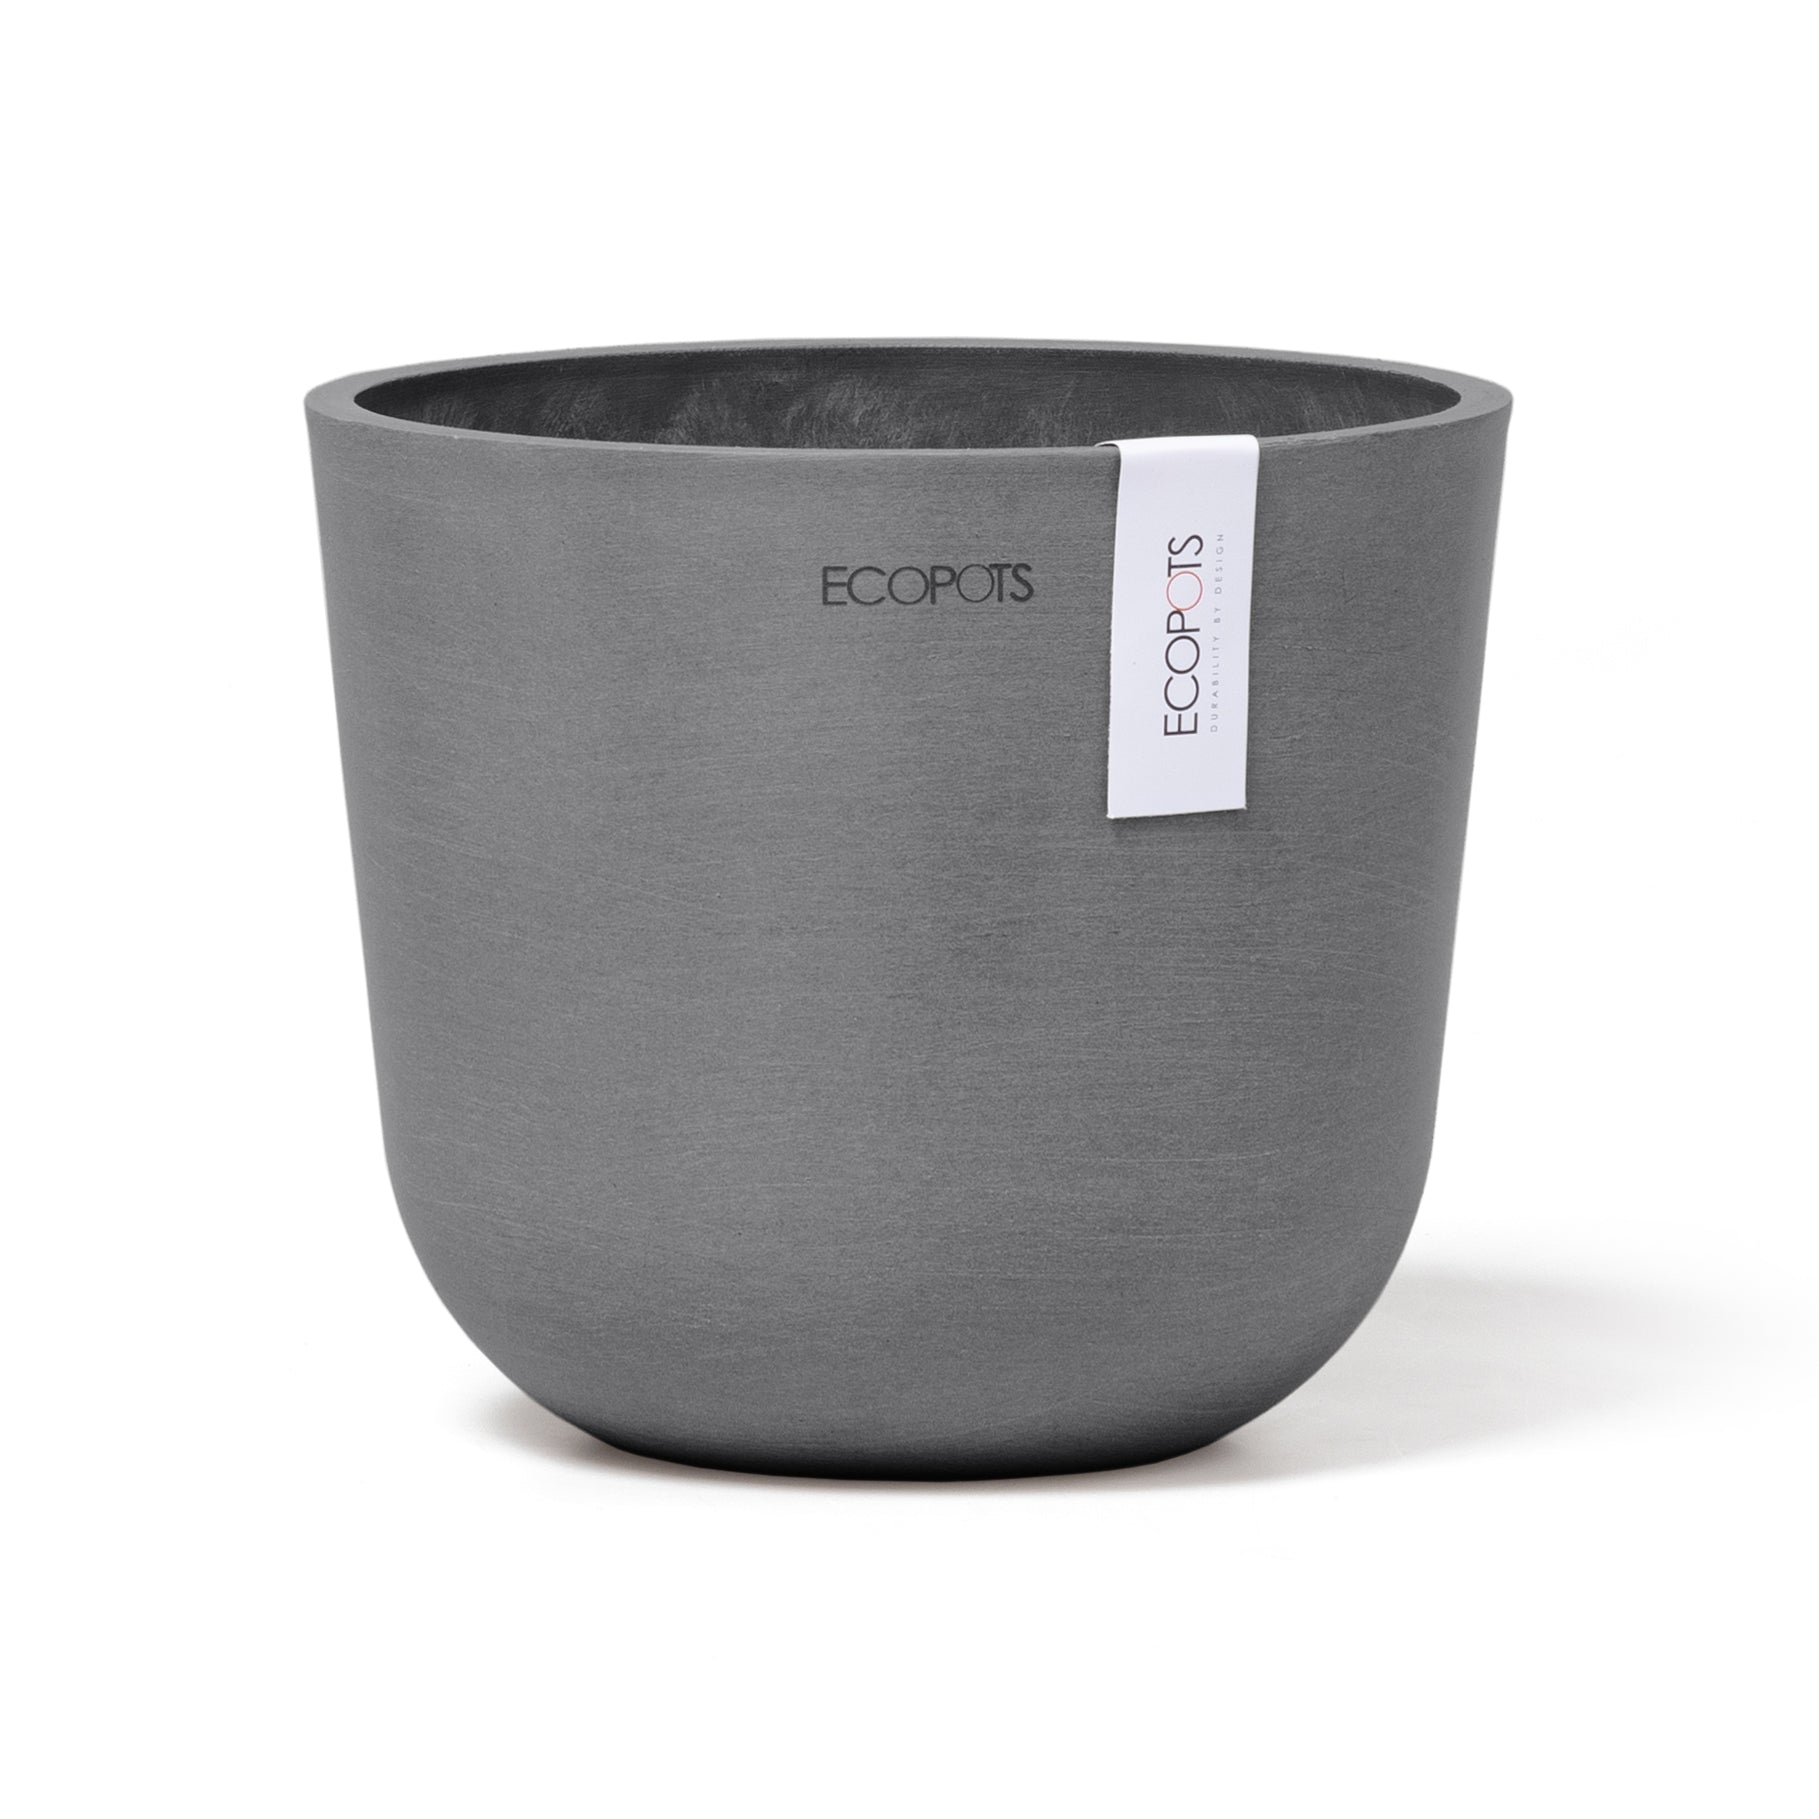 Oslo Eco Pot in Grey from The Good Plant Co